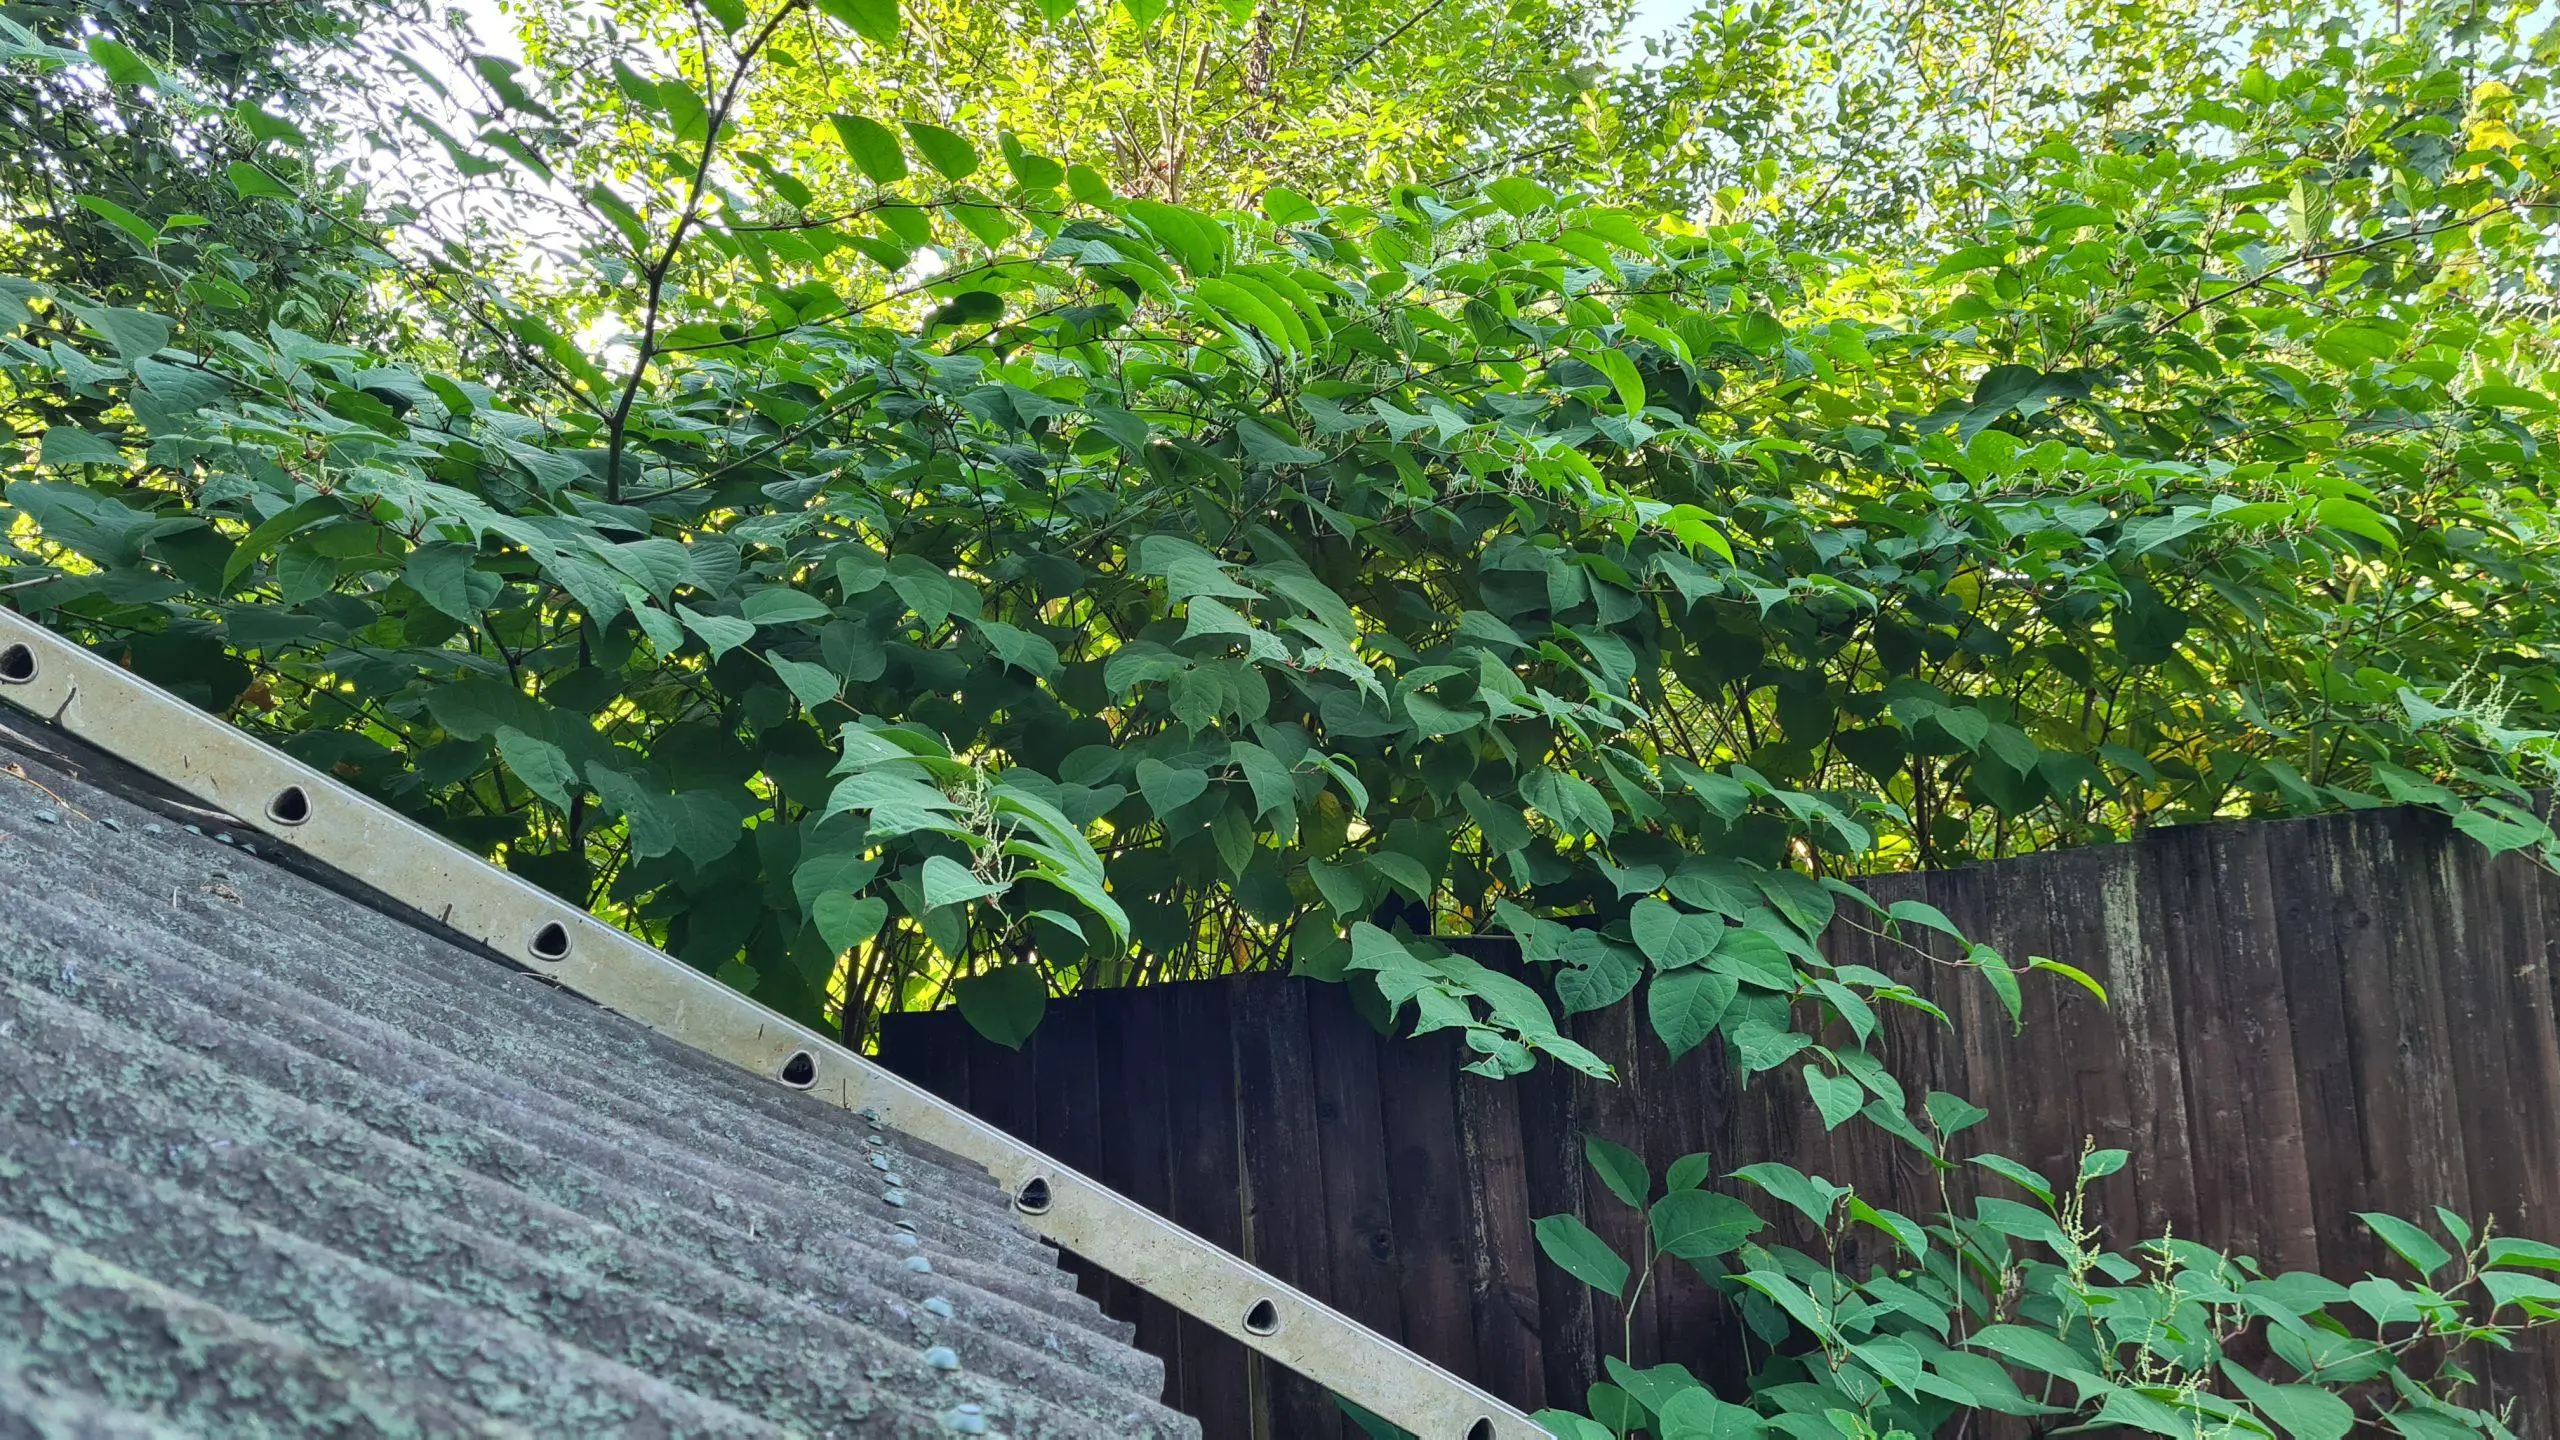 Controlling the infestation of Japanese knotweed is crucial when you see how high and how far it grows